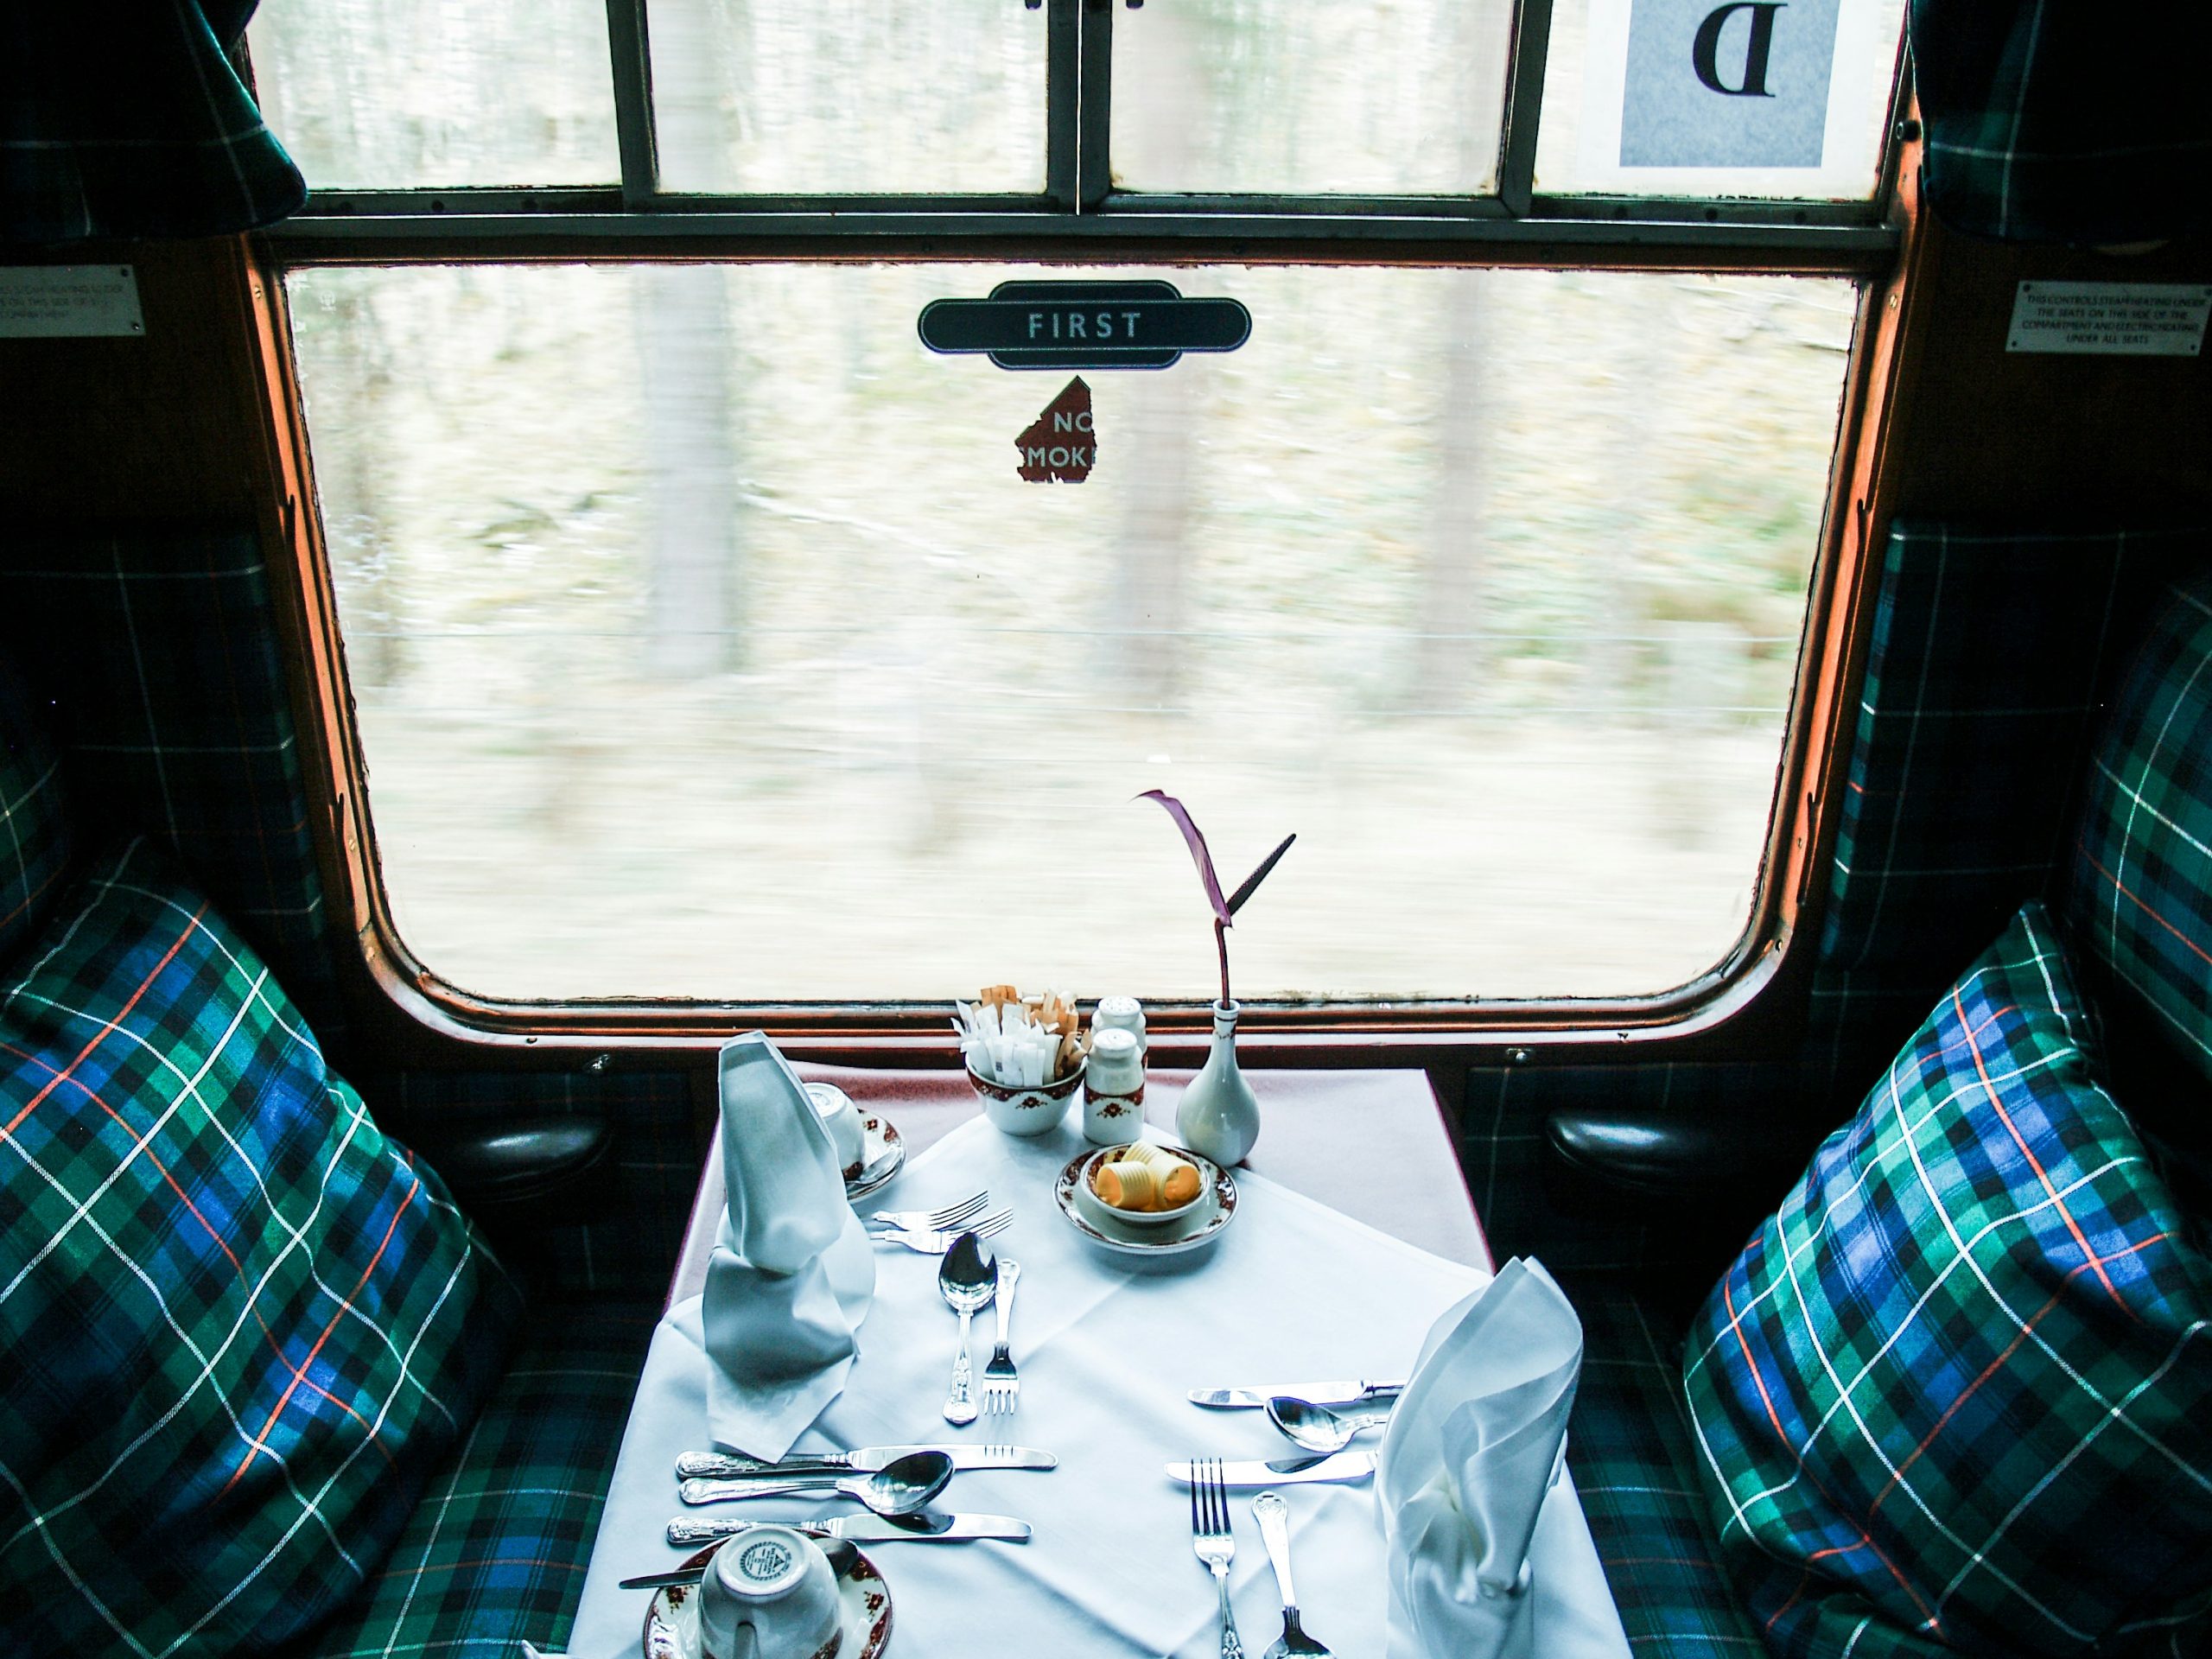 experience the epitome of luxury train travel with our unforgettable journeys through breathtaking landscapes and impeccable service.